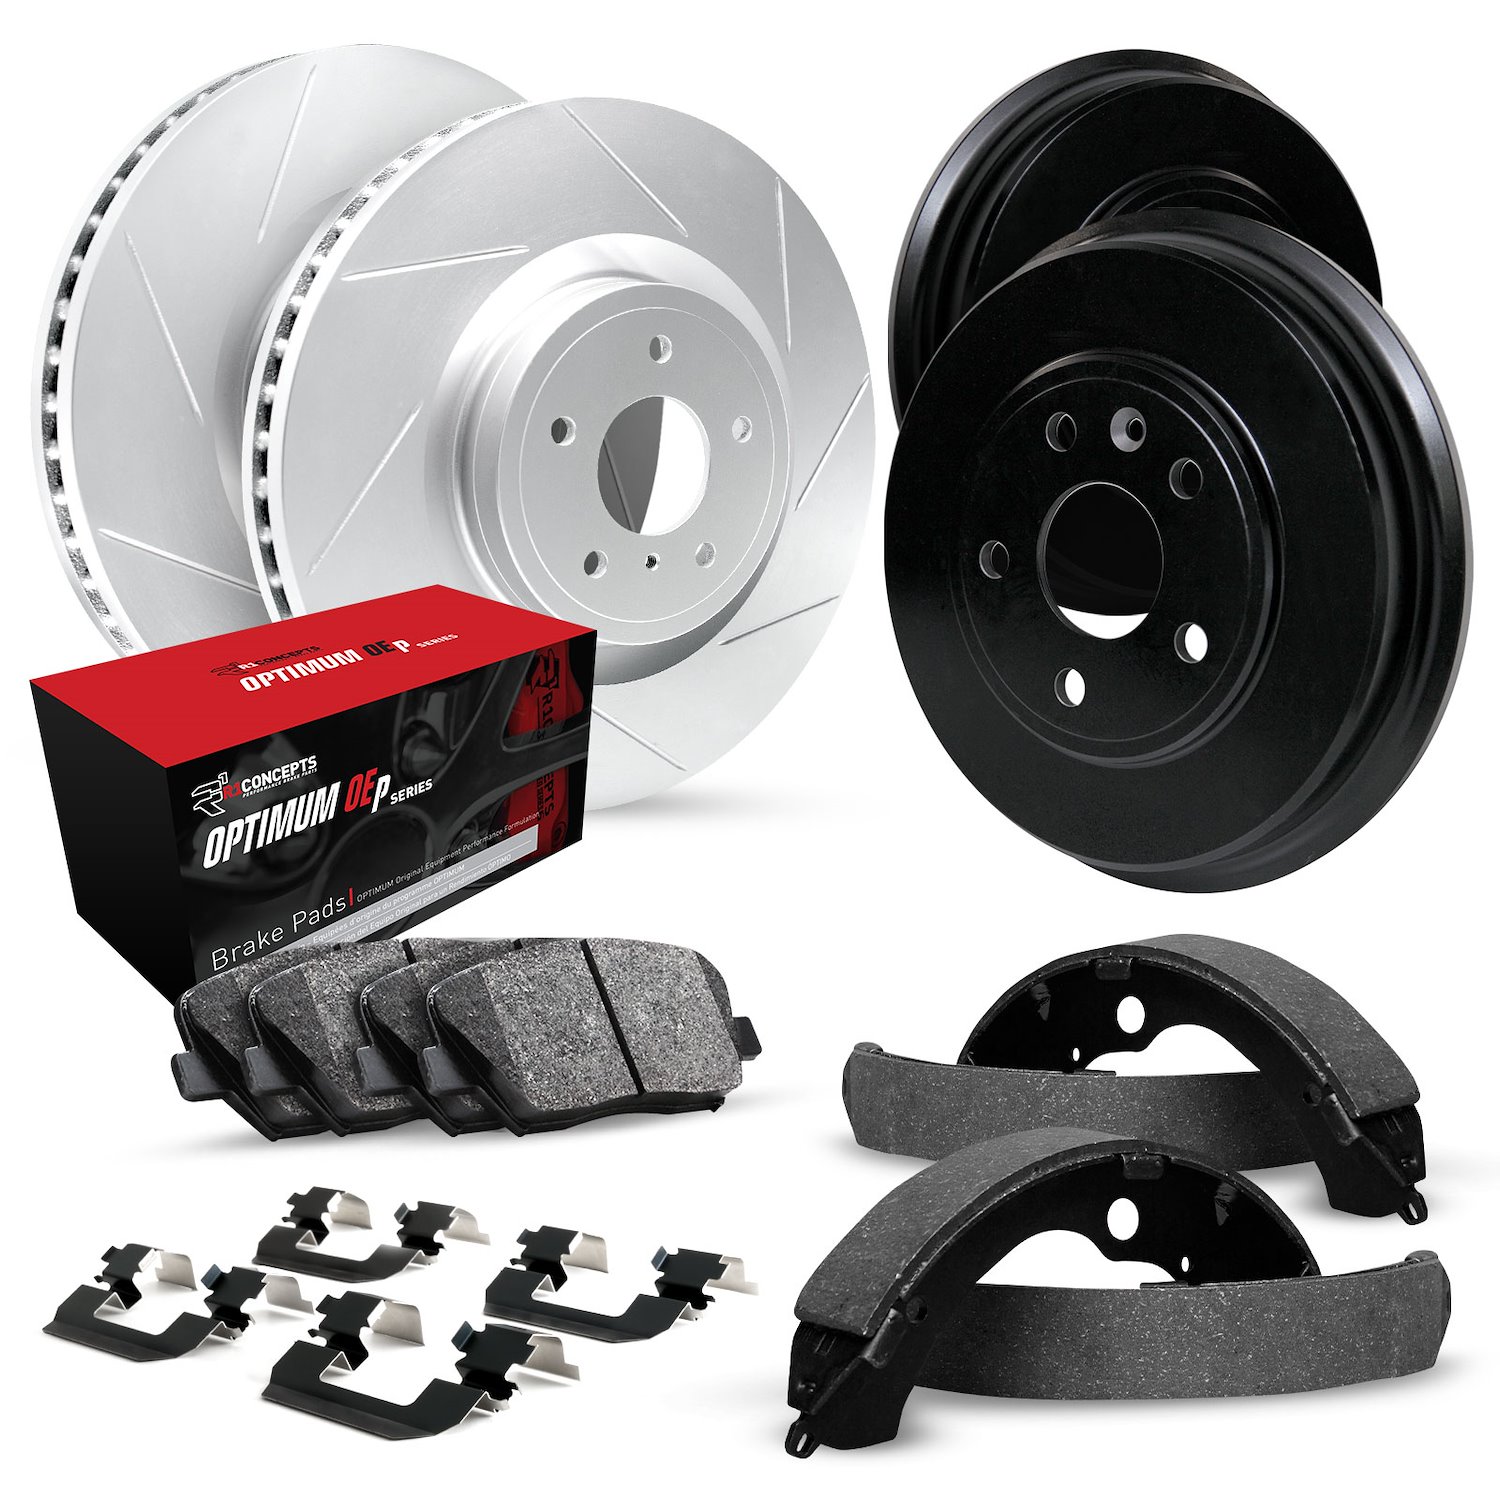 GEO-Carbon Slotted Brake Rotor & Drum Set w/Optimum OE Pads, Shoes, & Hardware, 1988-1991 GM, Position: Front & Rear